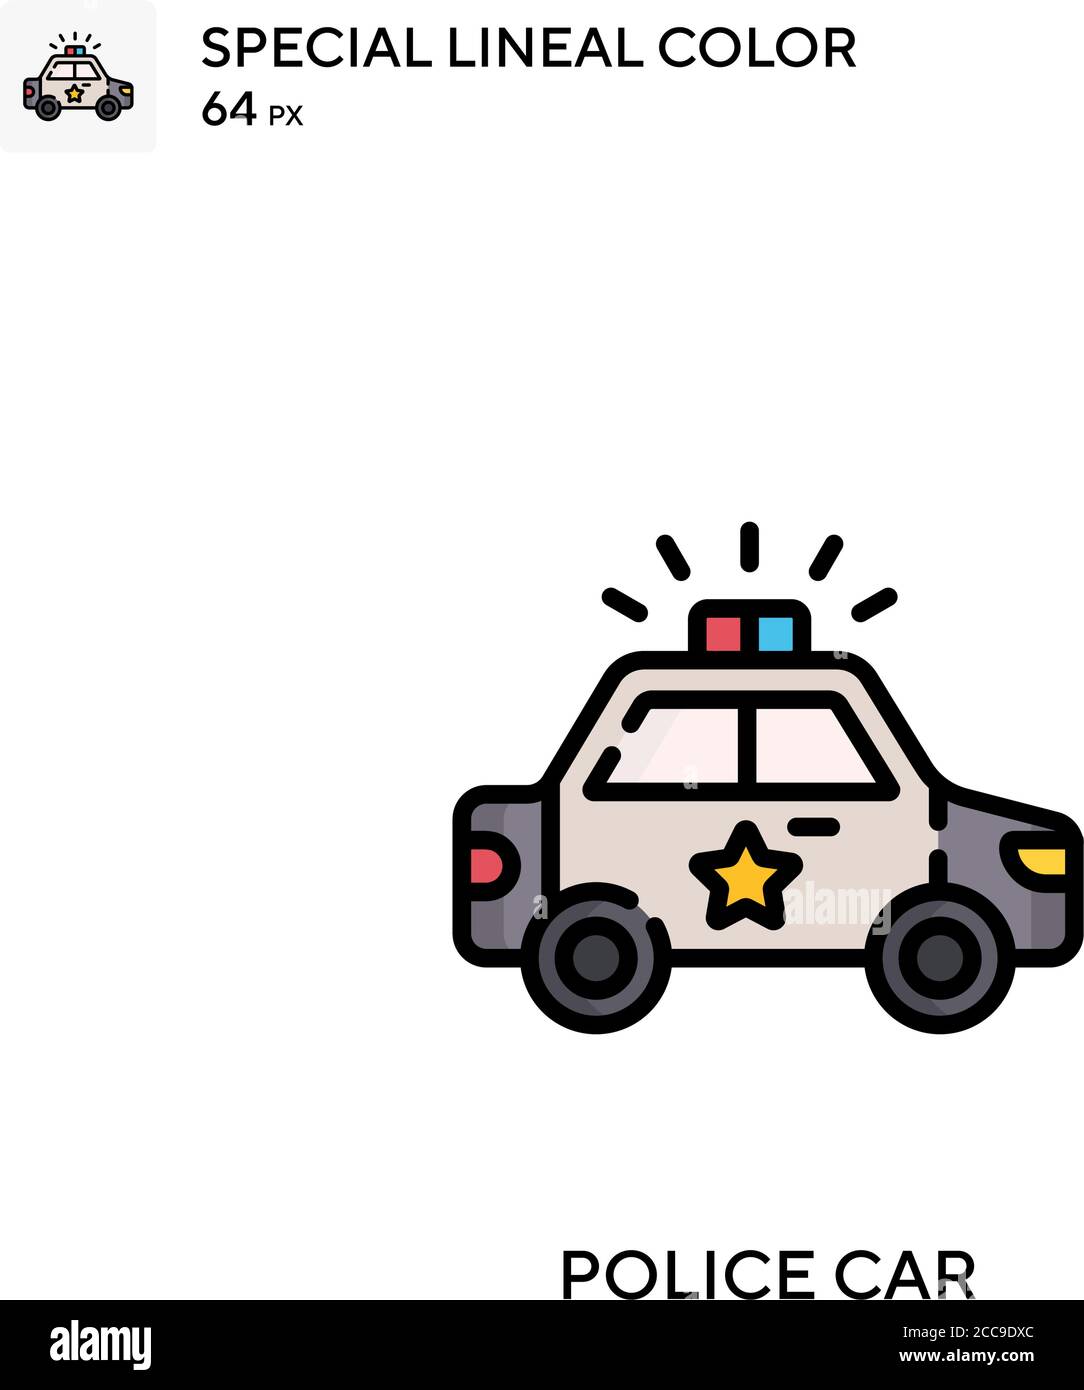 police-car-special-lineal-color-vector-icon-illustration-symbol-design-template-for-web-mobile